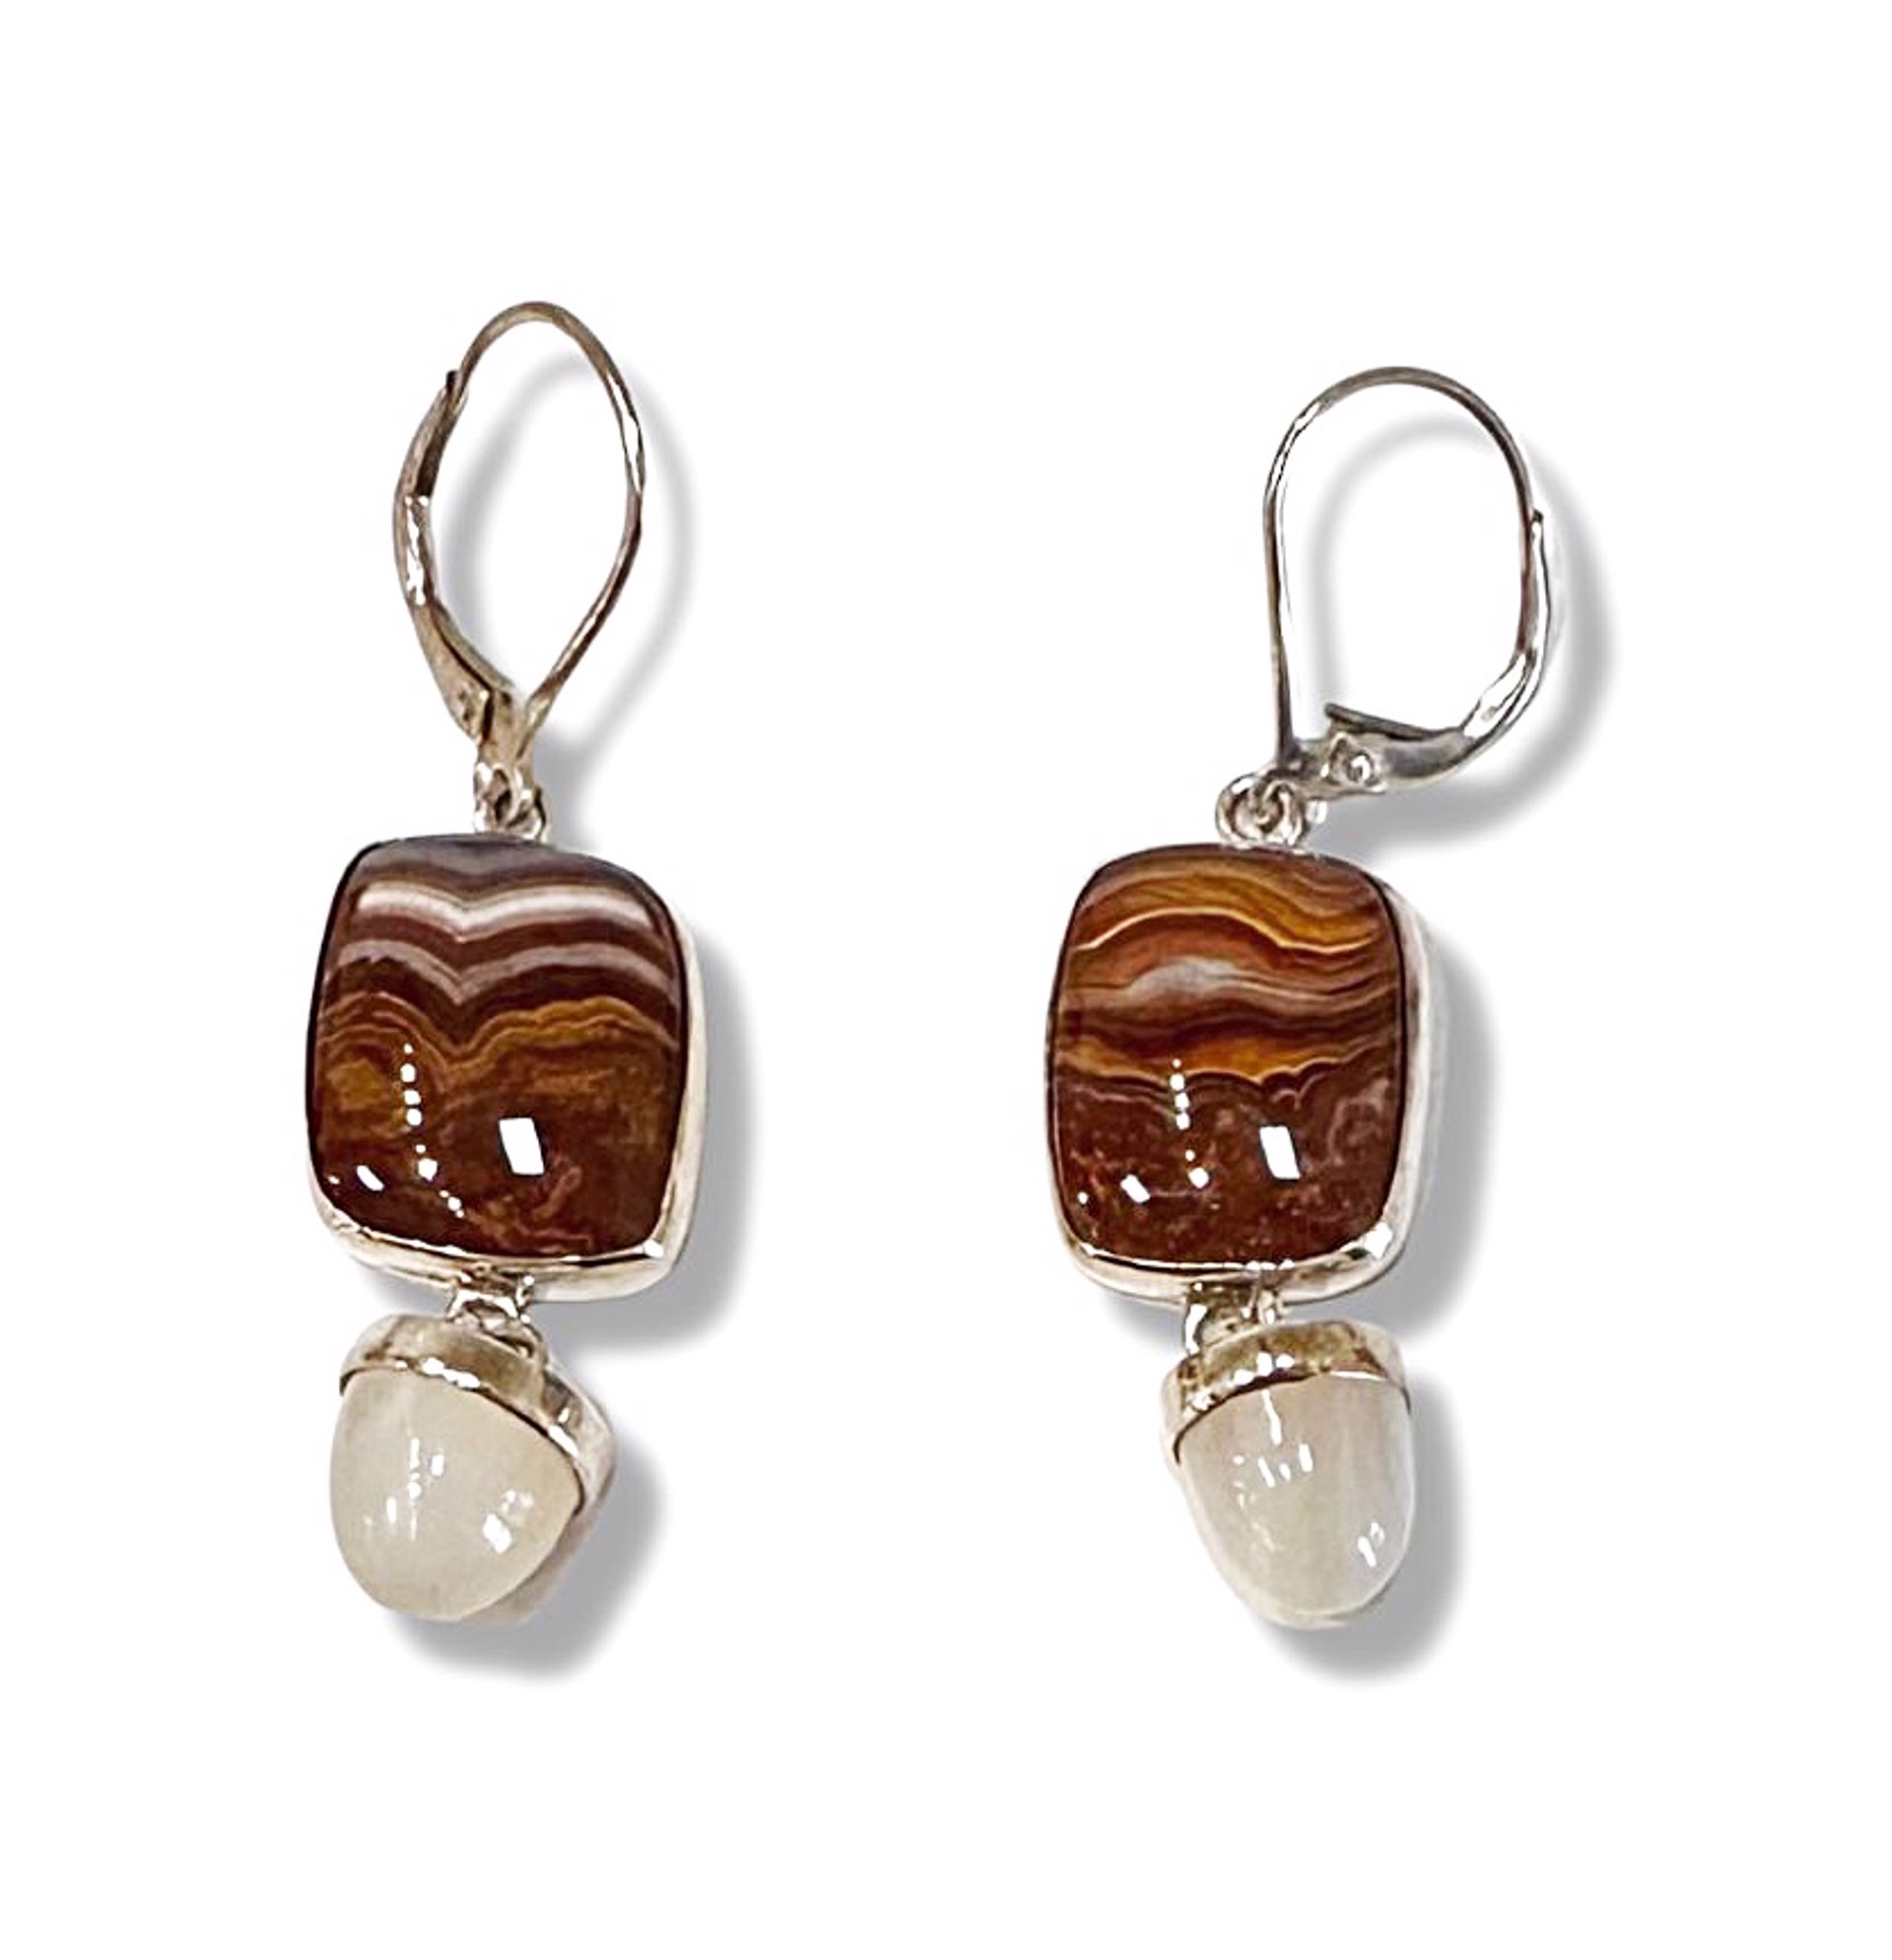 Sterling Earrings with Agates & Moonstones - #501 by Ken and Barbara Newman